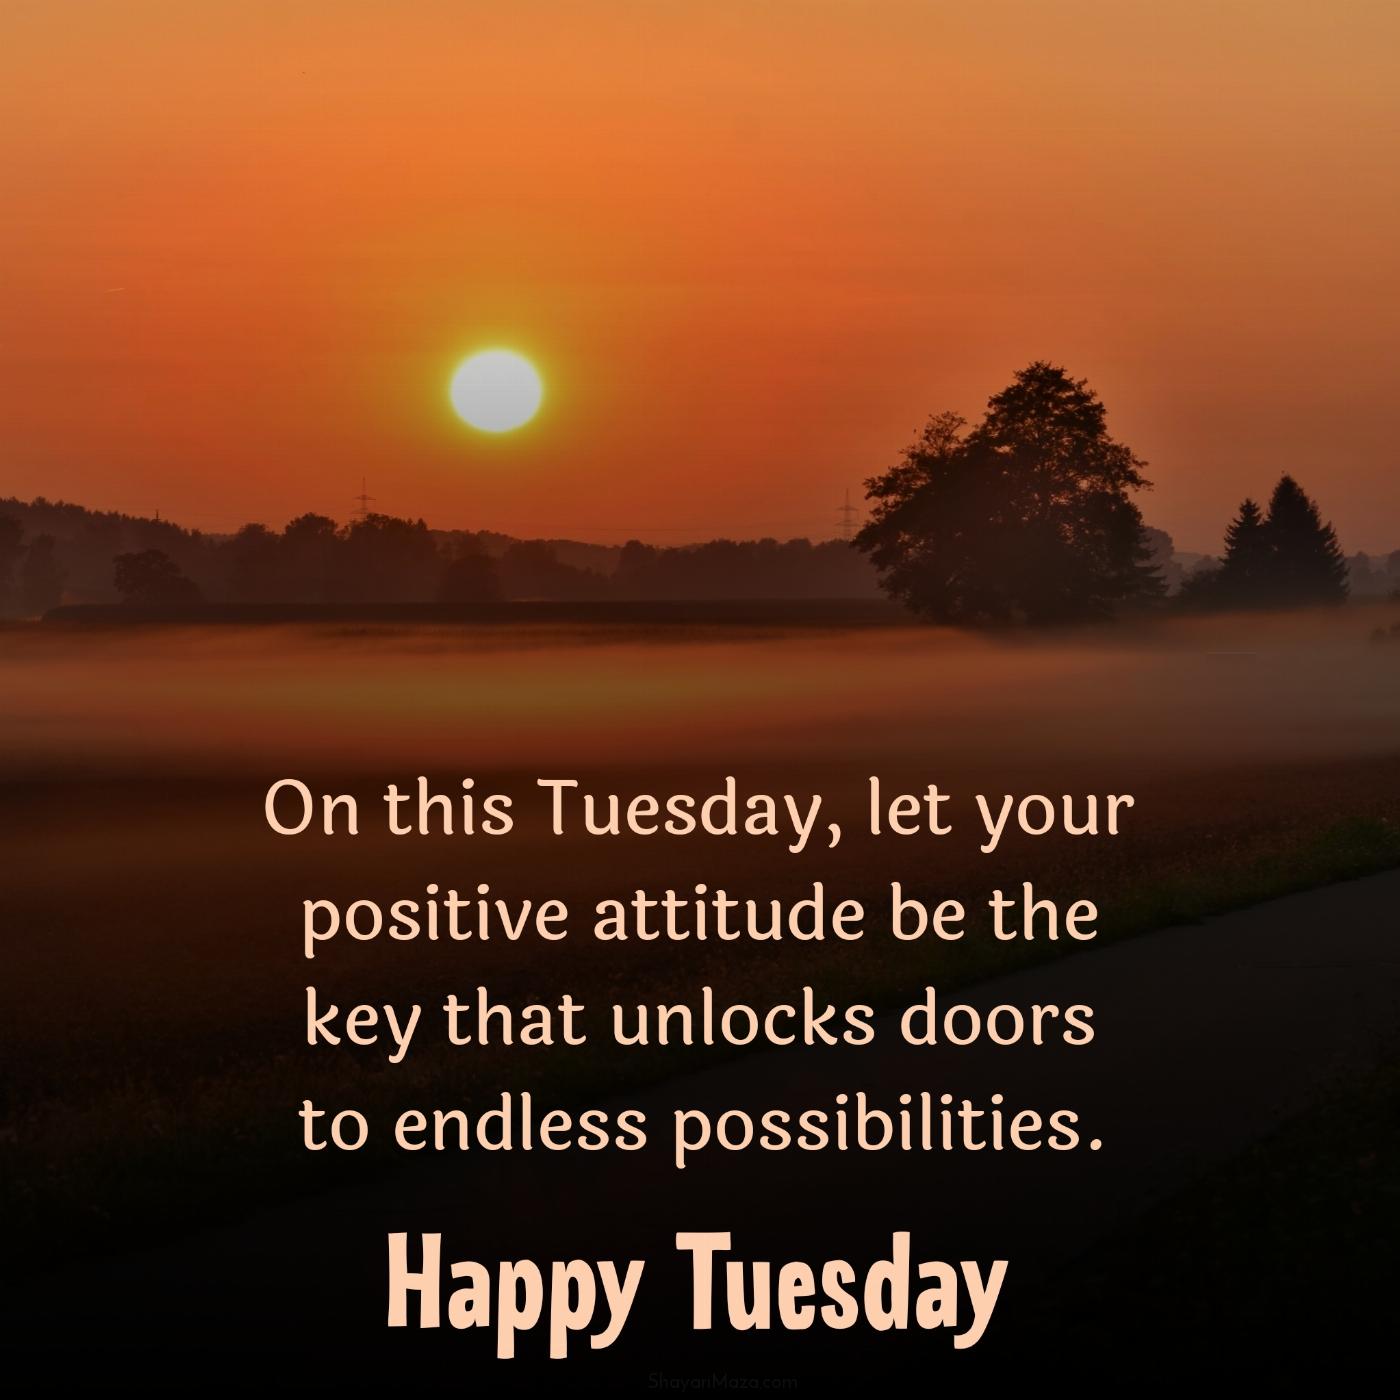 On this Tuesday let your positive attitude be the key